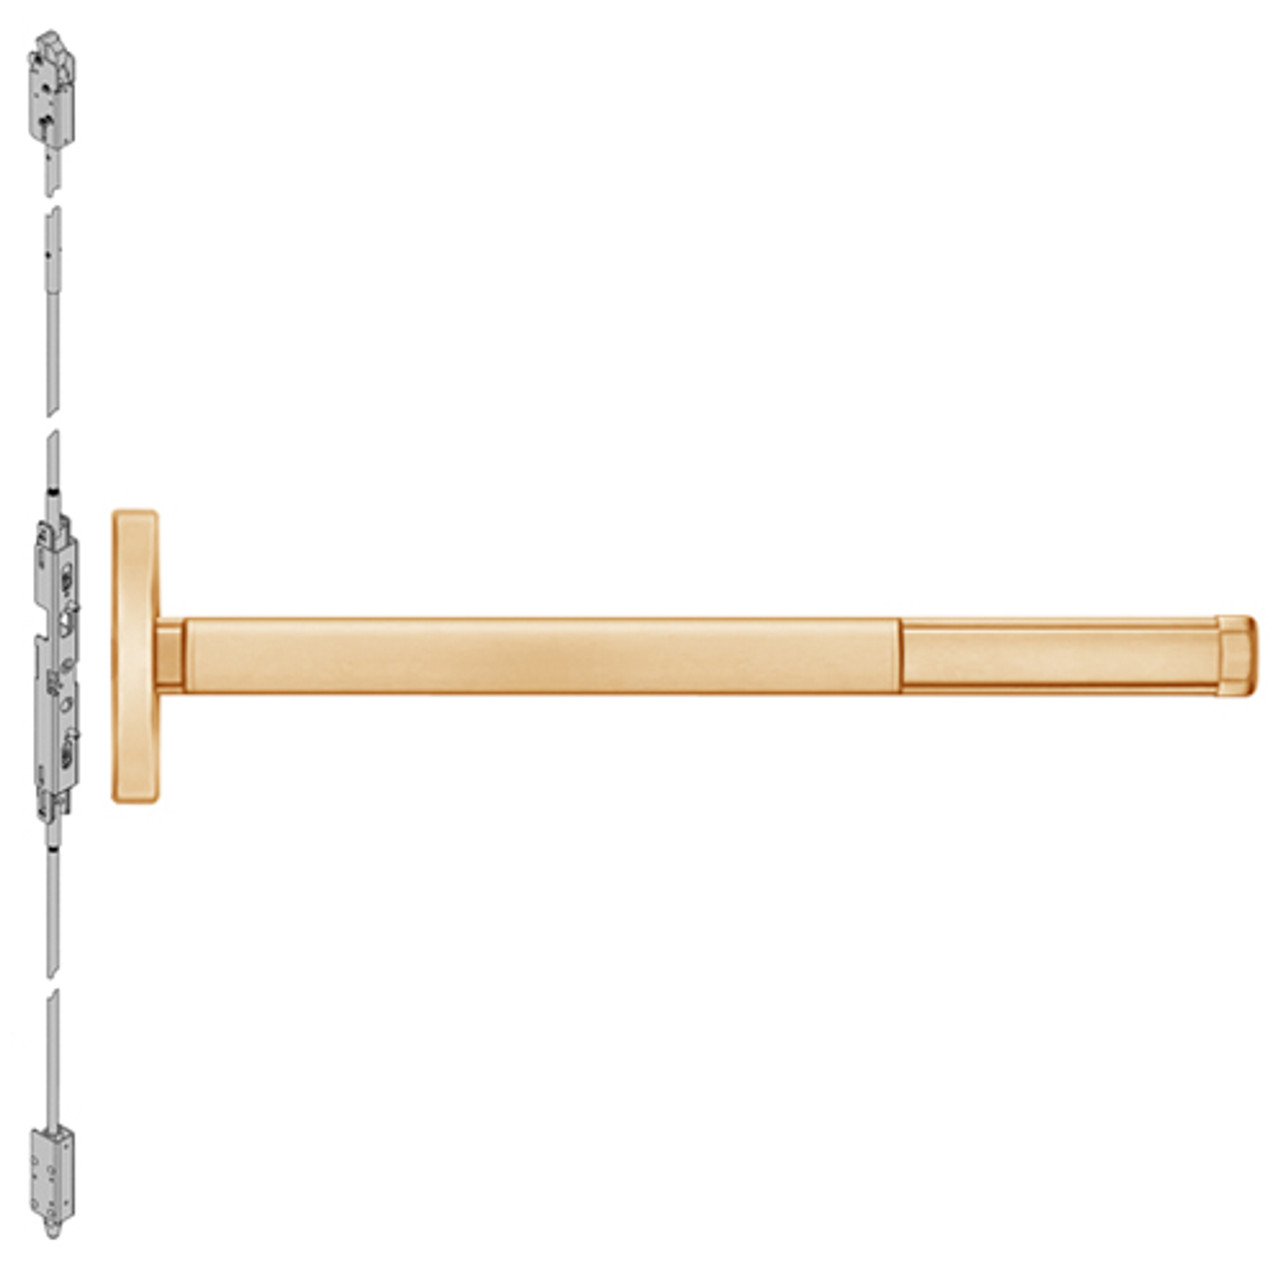 2603LBR-612-48 PHI 2600 Series Non Fire Rated Concealed Vertical Rod Exit Device Prepped for Key Retracts Latchbolt with Less Bottom Rod in Satin Bronze Finish